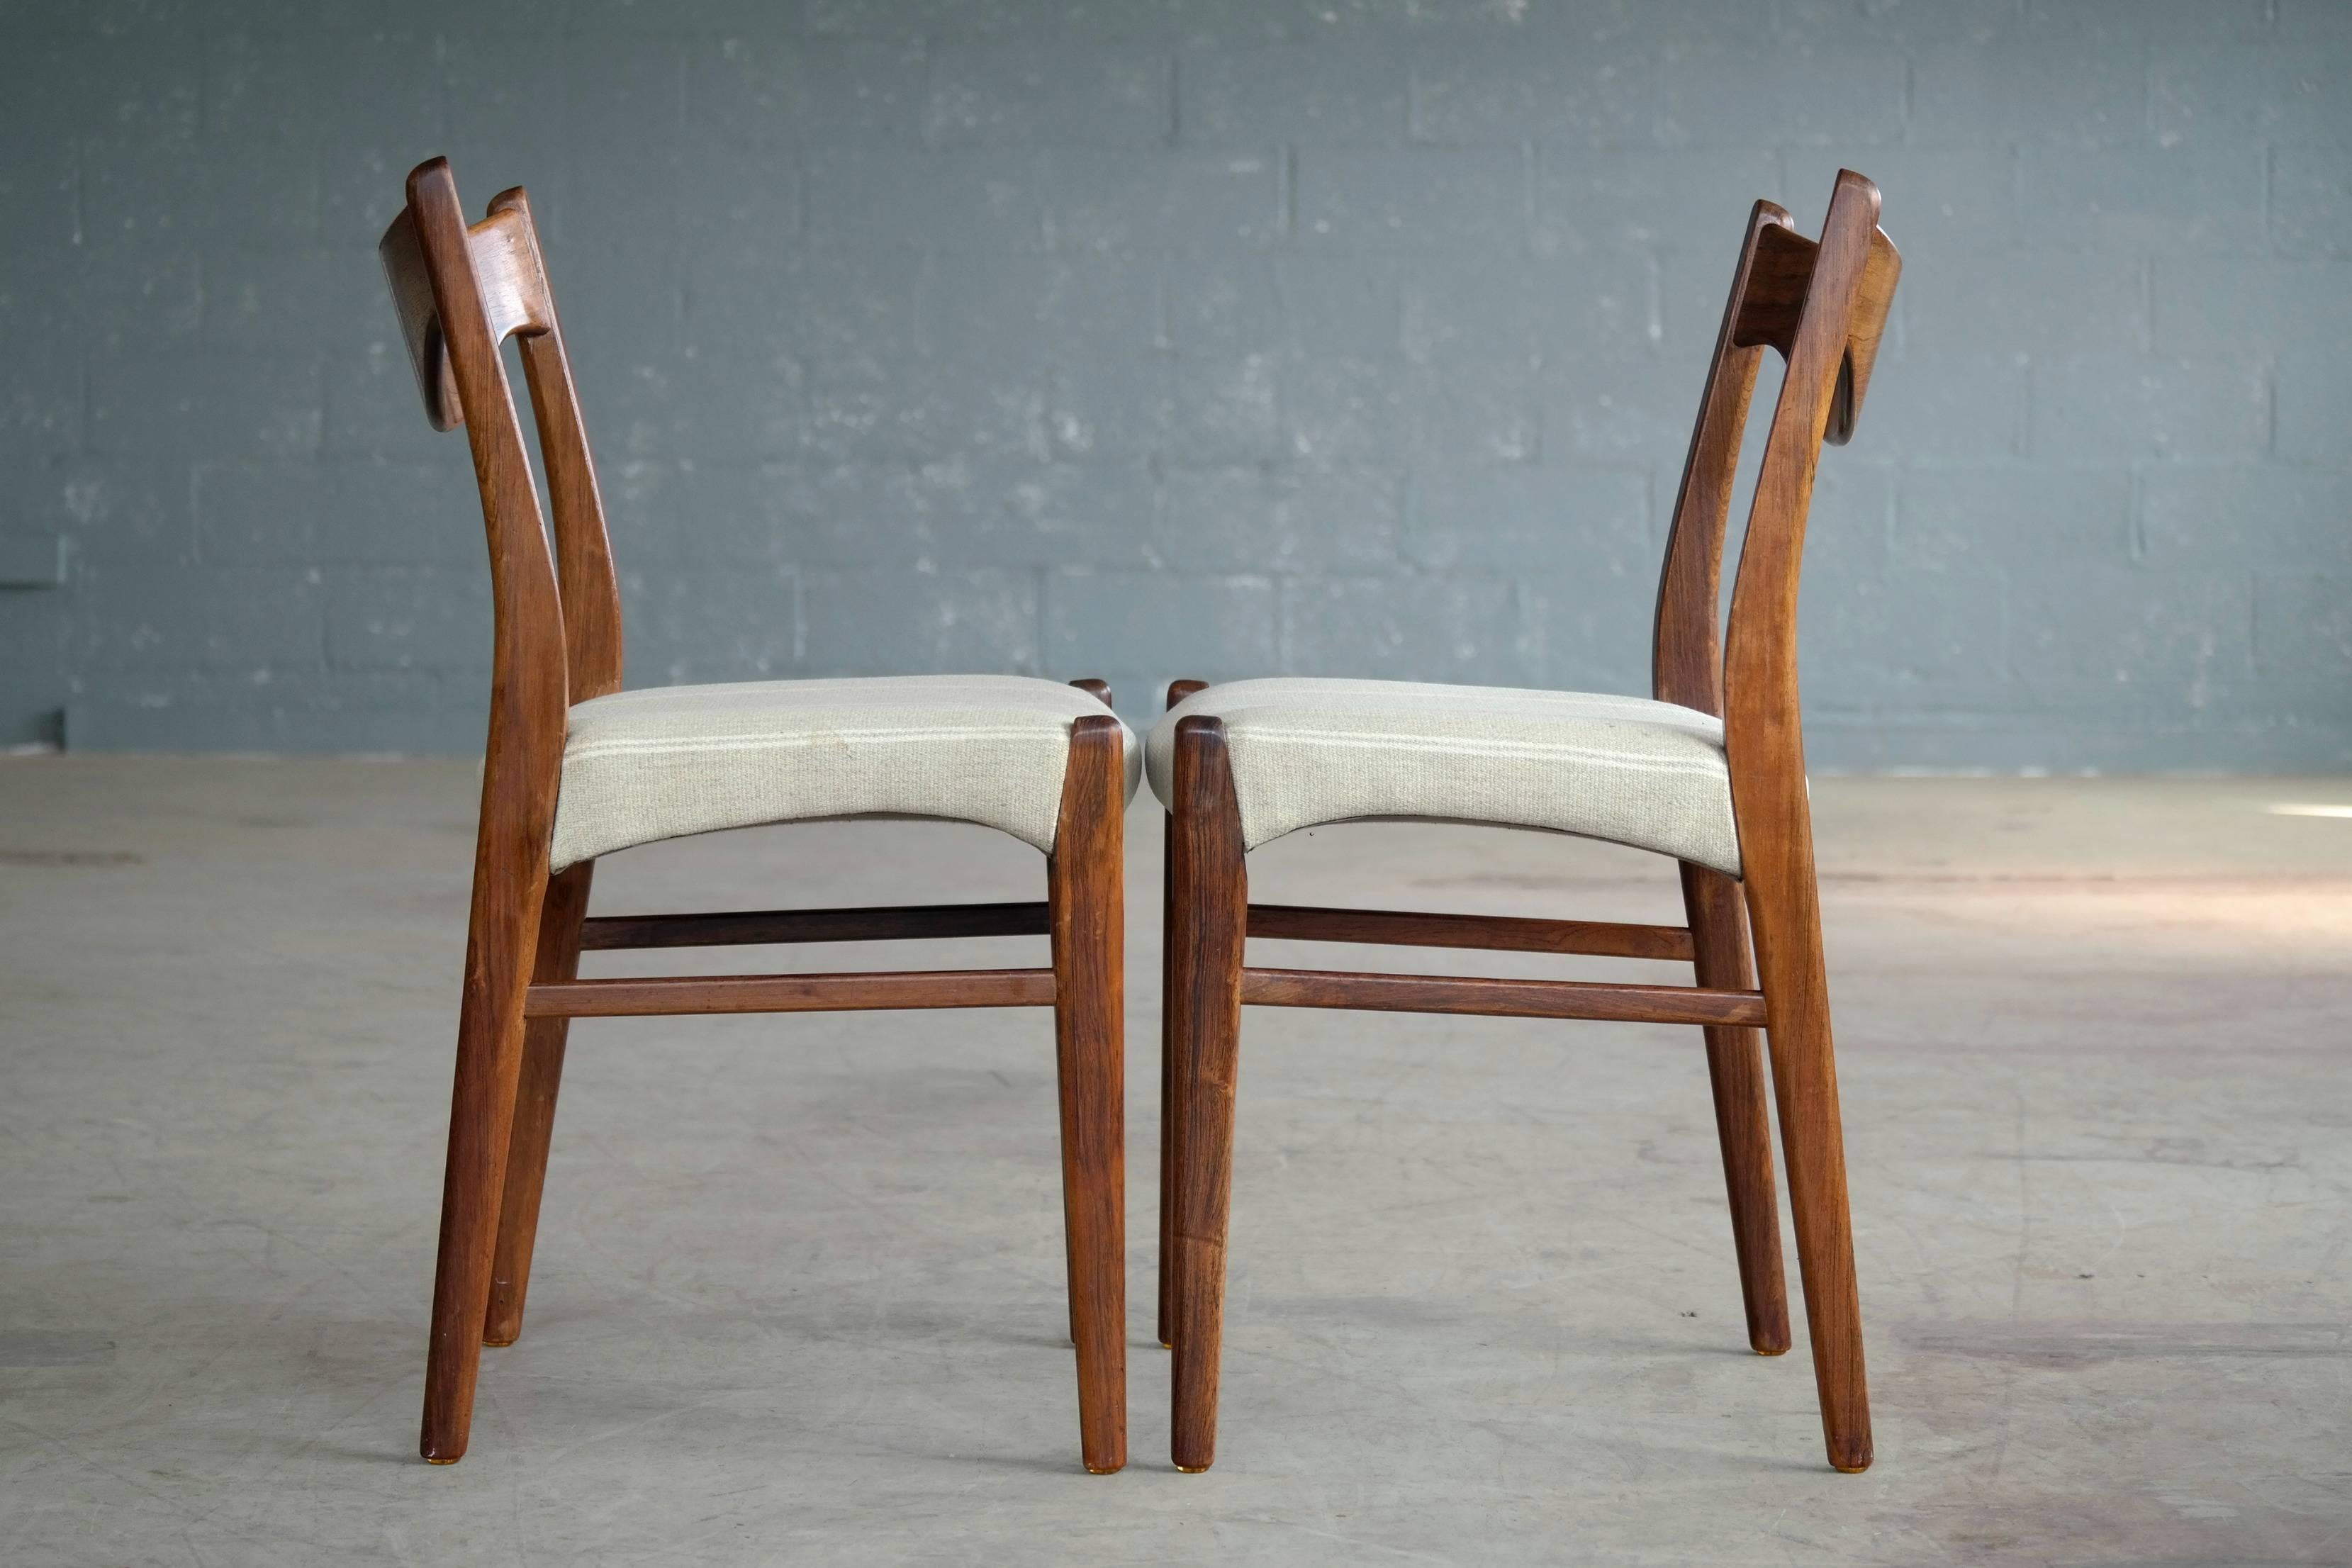 Mid-20th Century Arne Wahl Iversen Set of Six Rosewood Dining Chairs for Glyngøre Møbler, Denmark